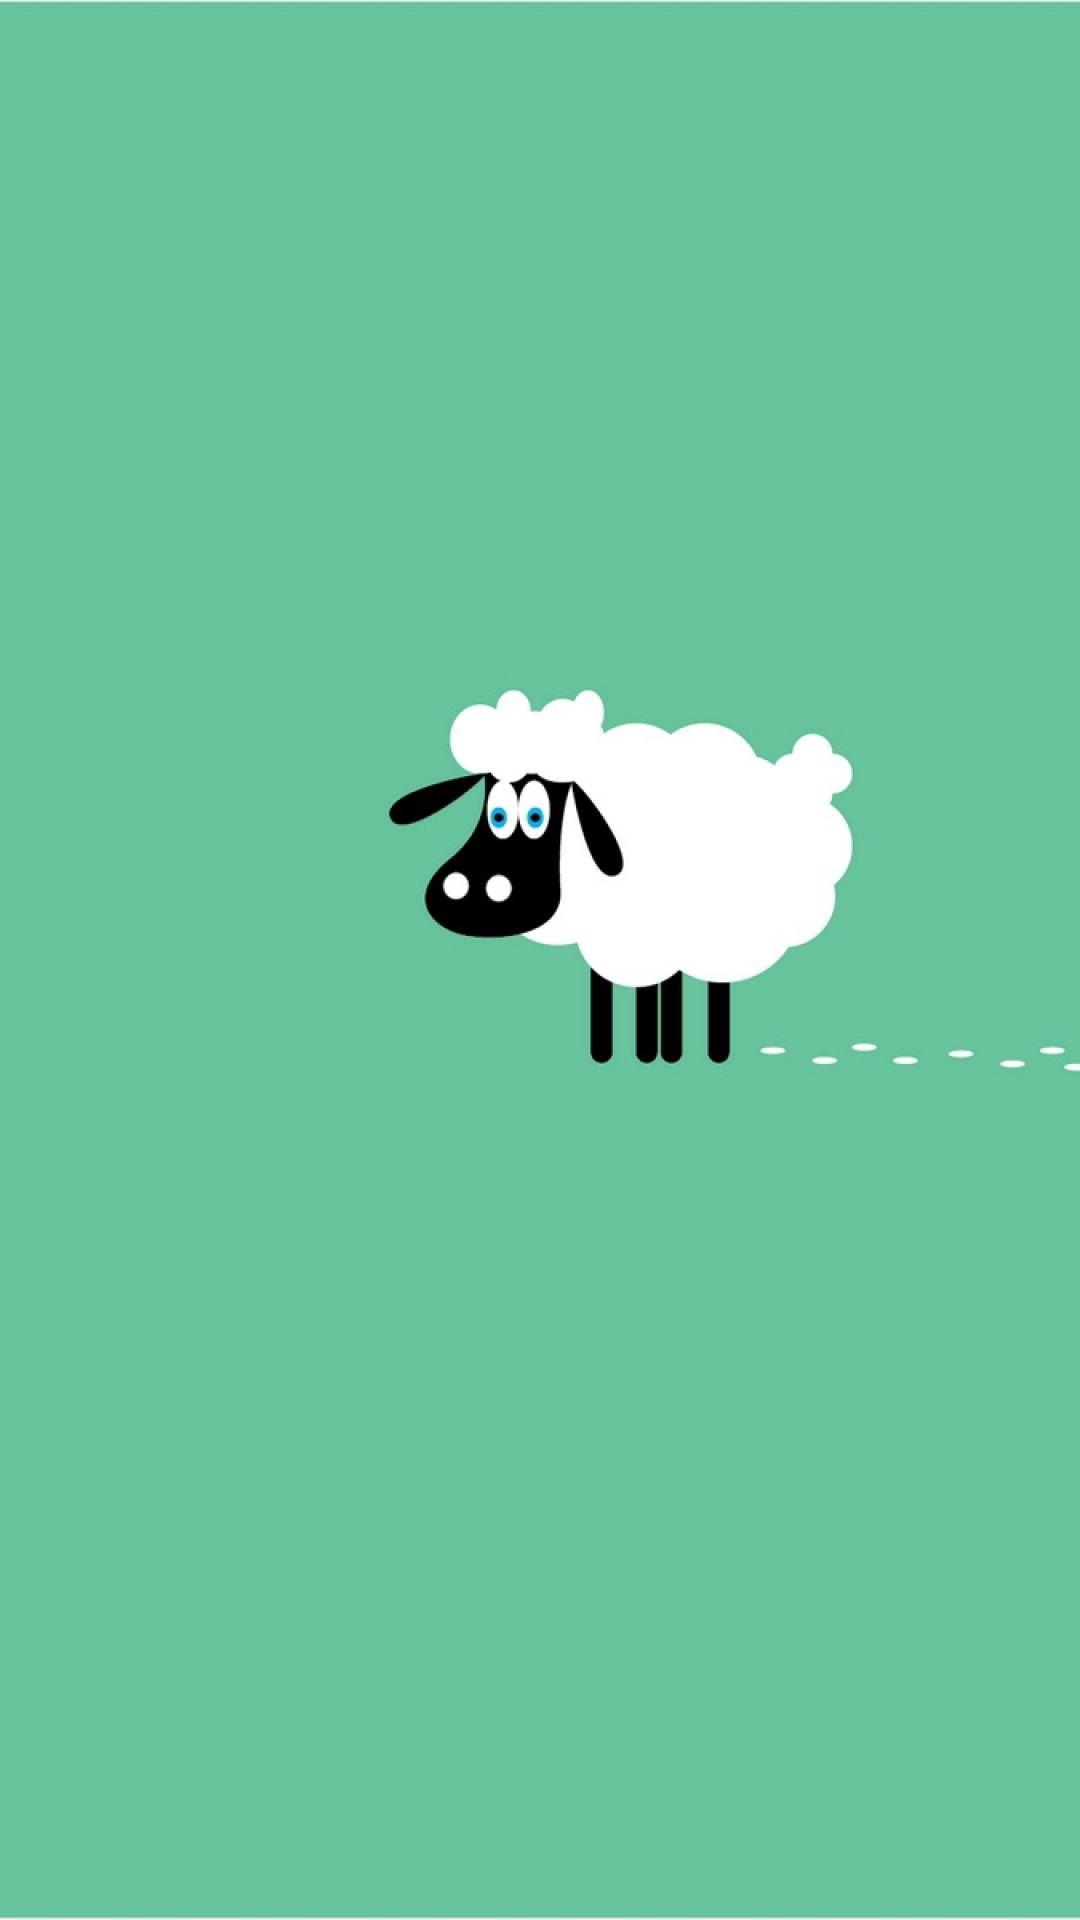 Sheep Animals Minimalistic Wallpapers for iPhone